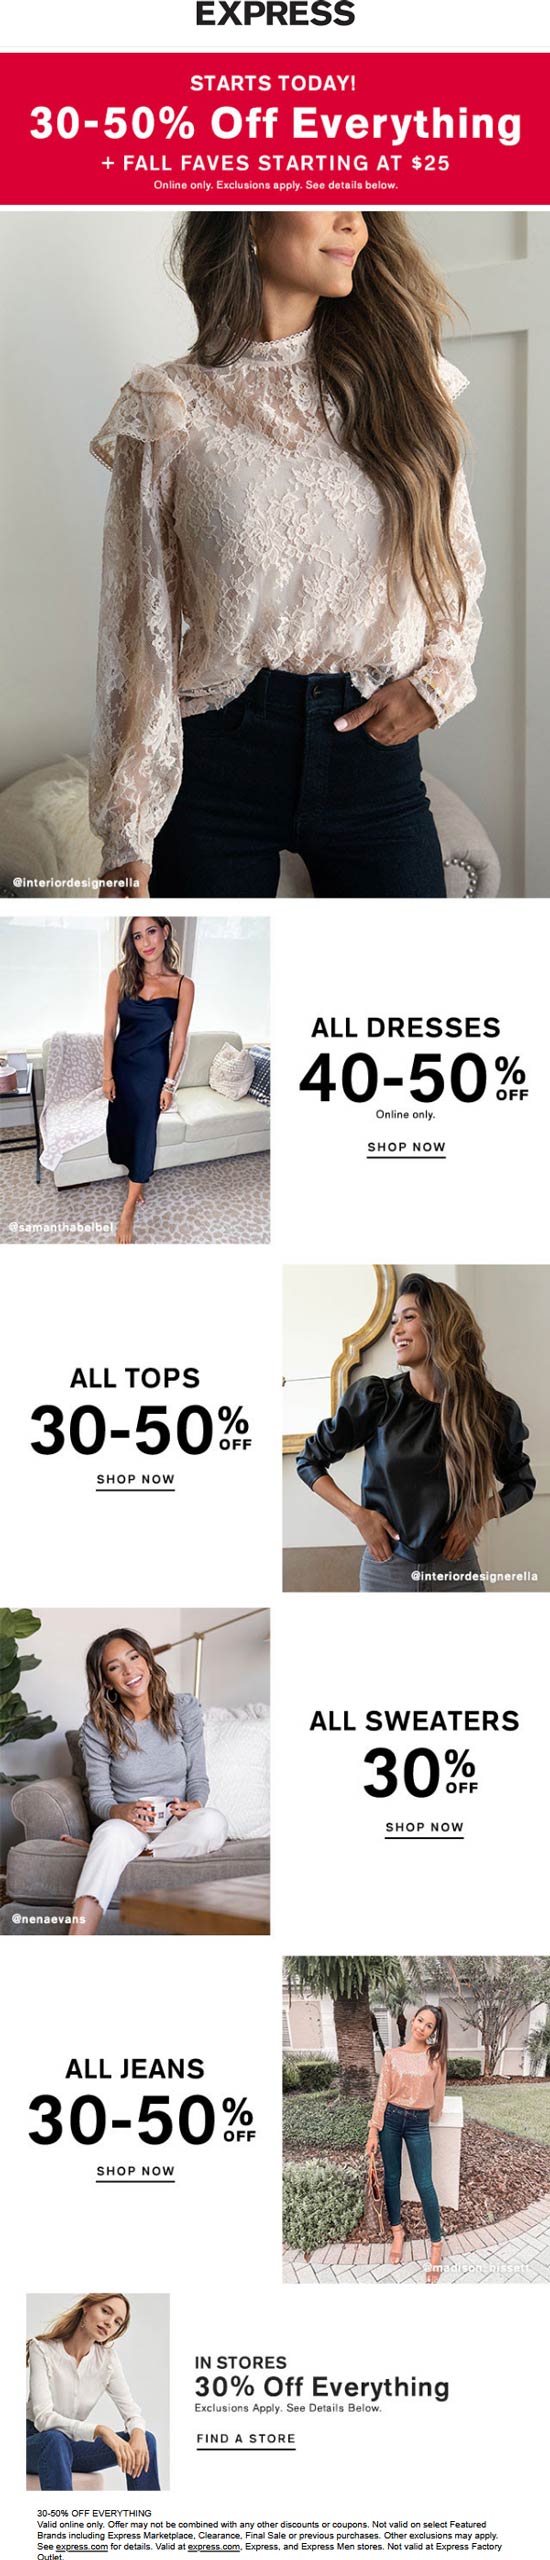 Express stores Coupon  30% off everything at Express, or 30-50% online #express 